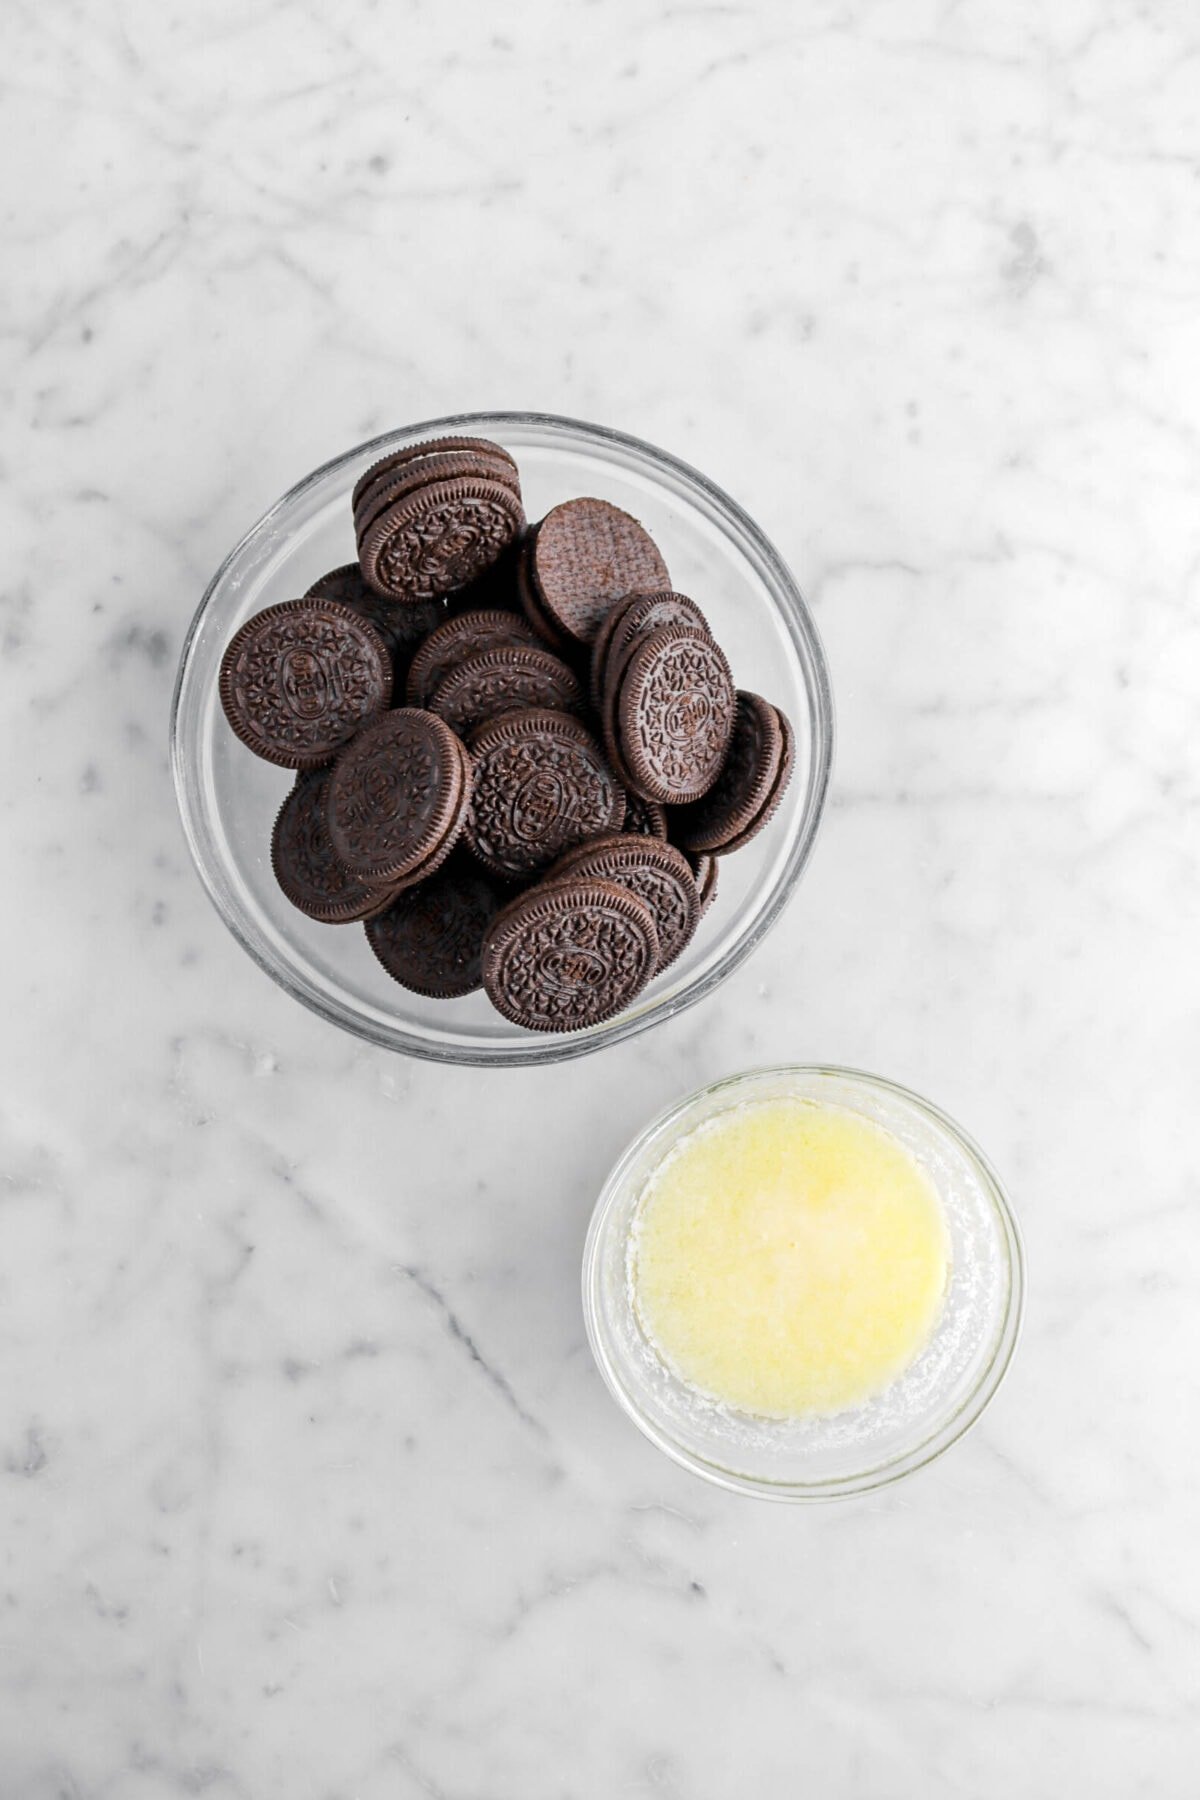 oreos and melted butter in two glass bowls on marble surface.